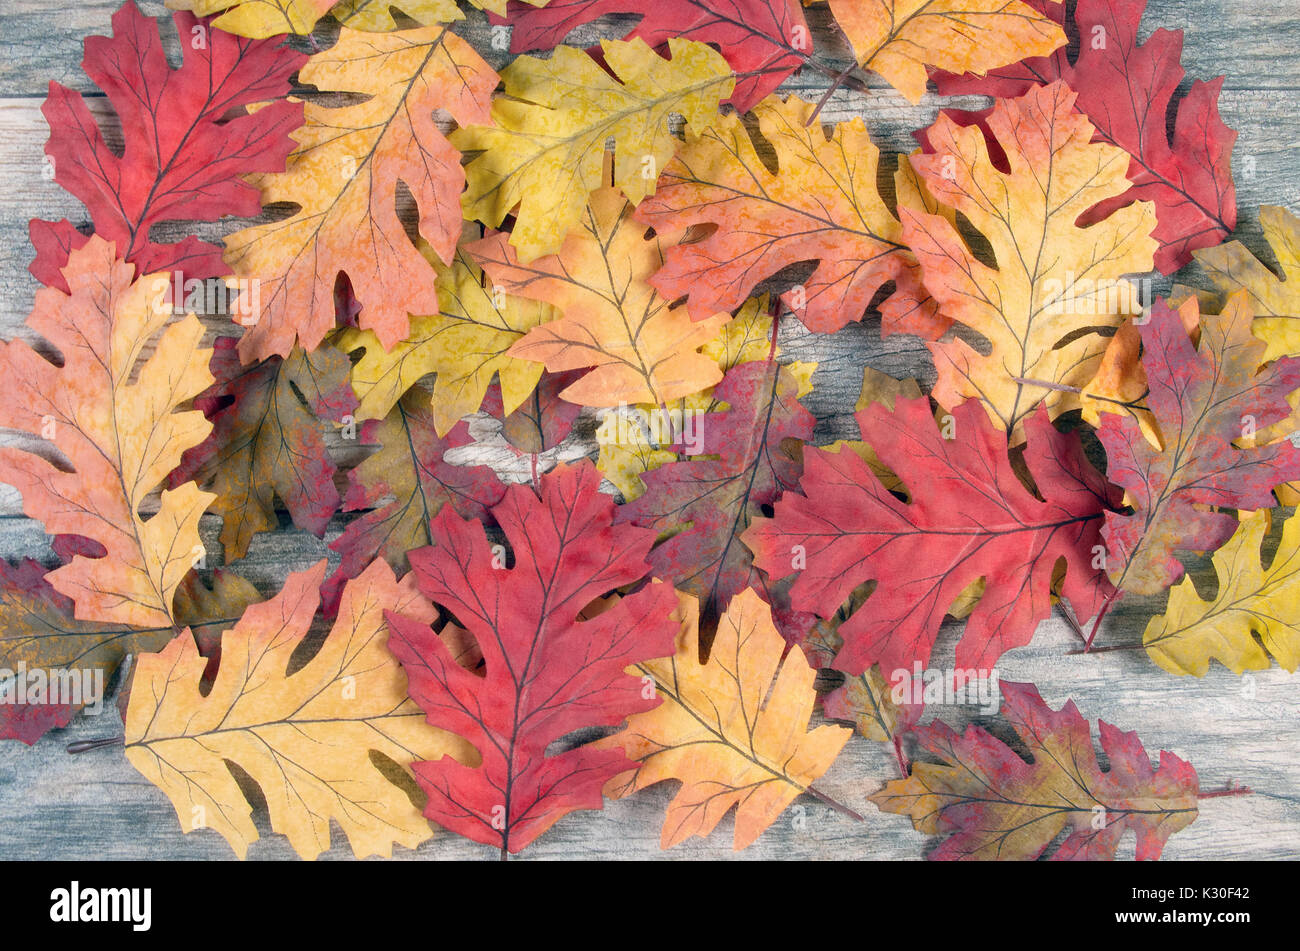 Fall leaves on wood background Stock Photo